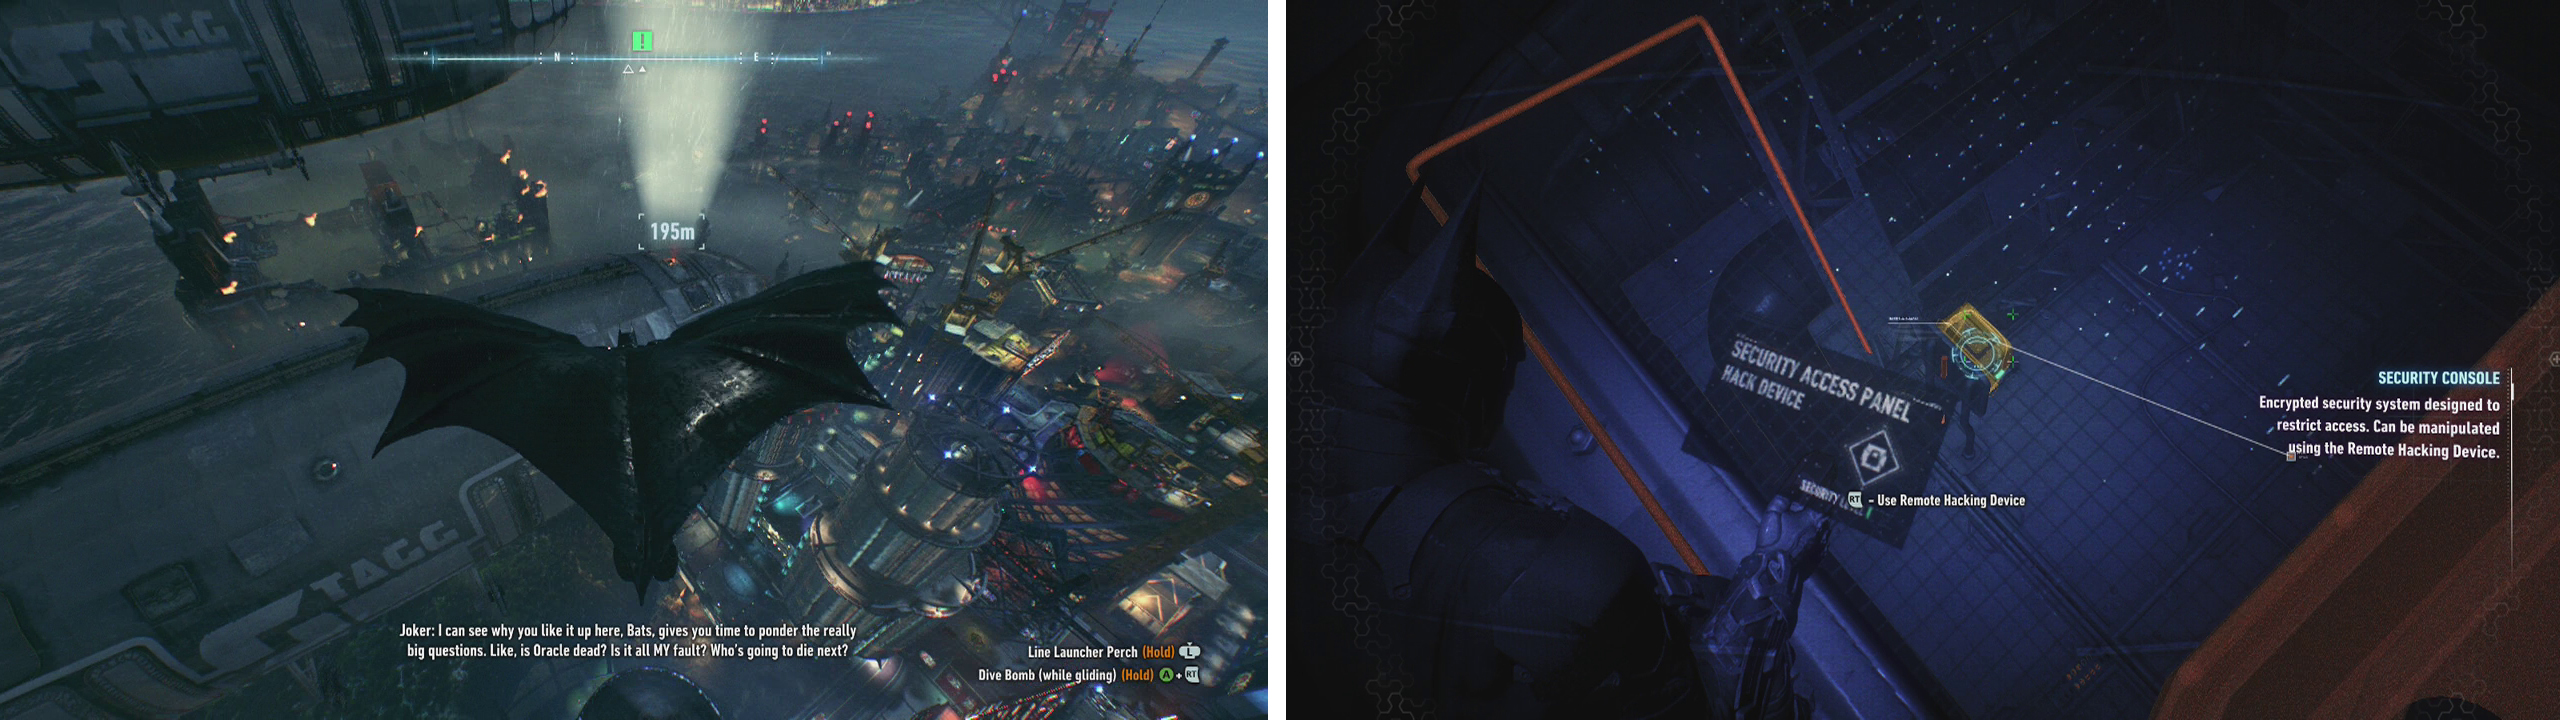 Fly down to the airship (left). Use the Remote Hacking Device 9right) to open the hatch to get inside.